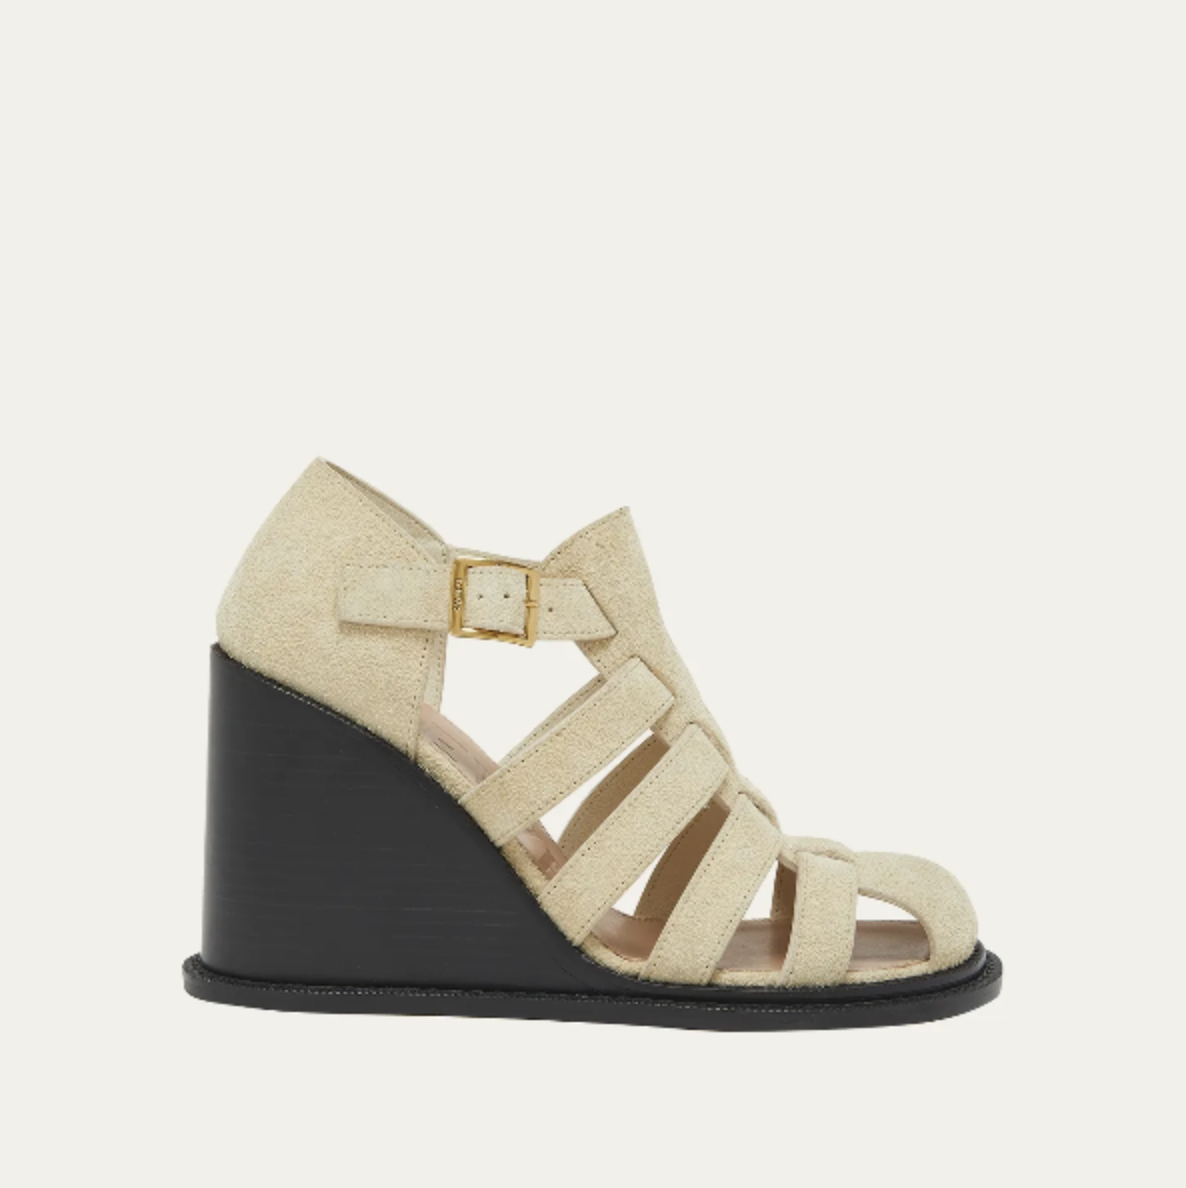 Womens Wedge Sandals | Cork & Leathers Wedge Sandals | Next